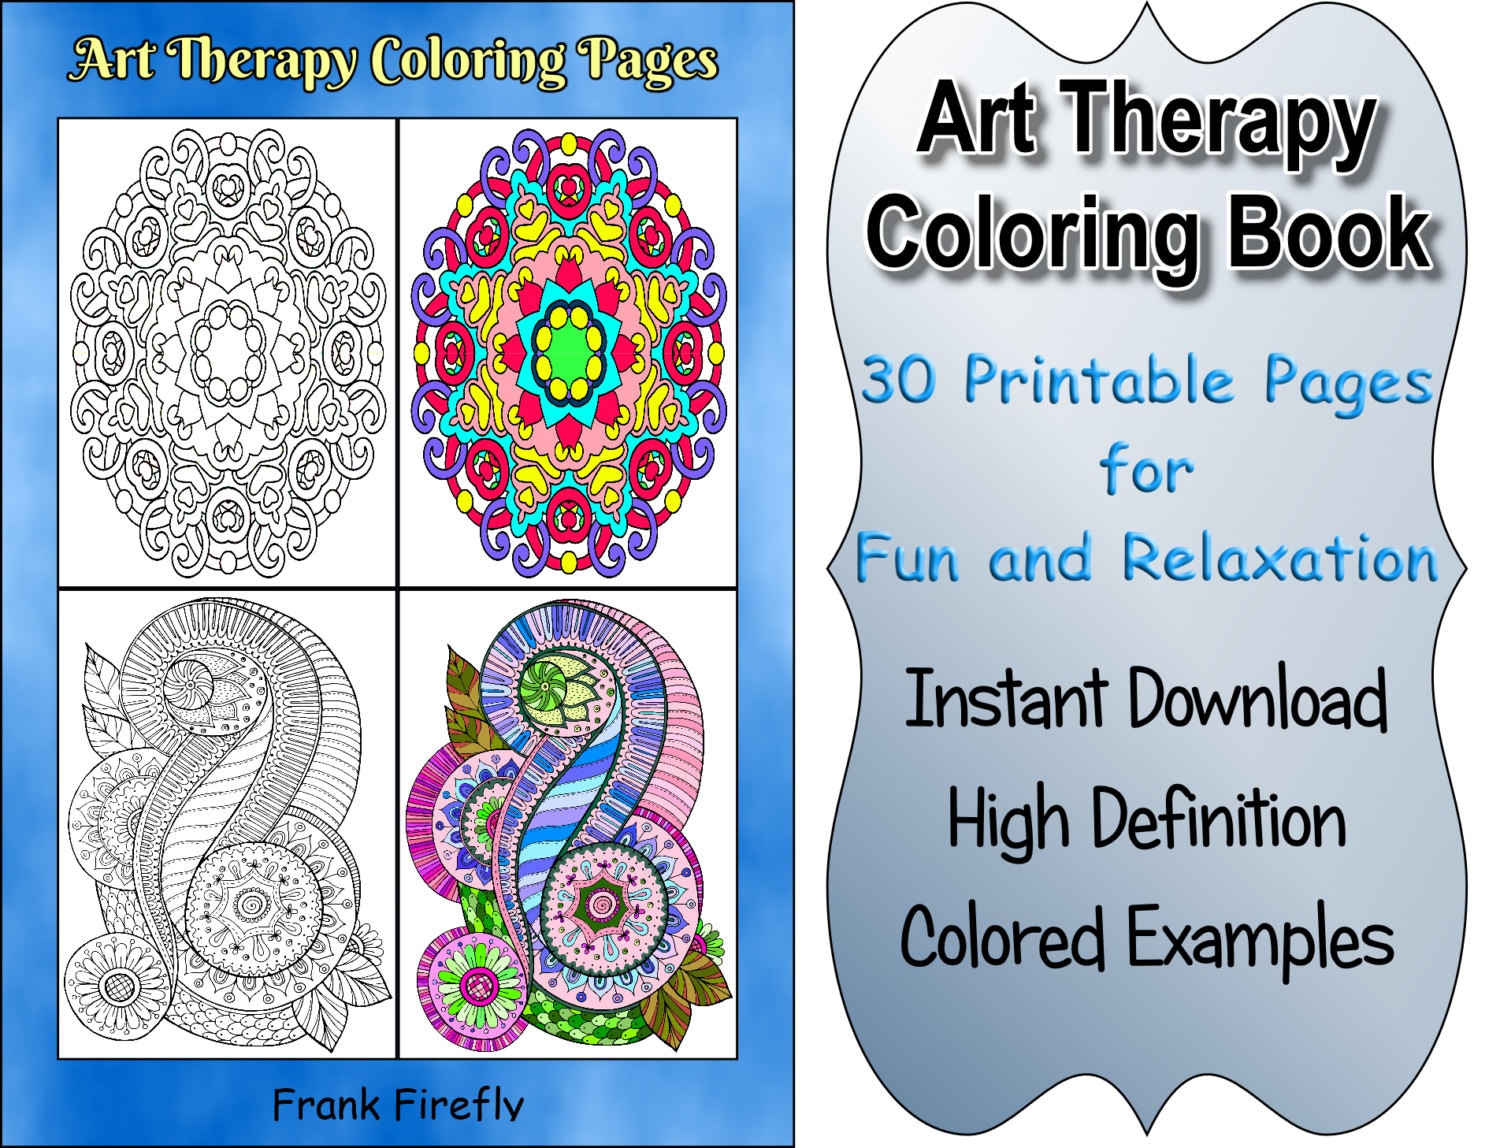 Download Art Therapy Coloring Book 30 Printable Coloring Pages